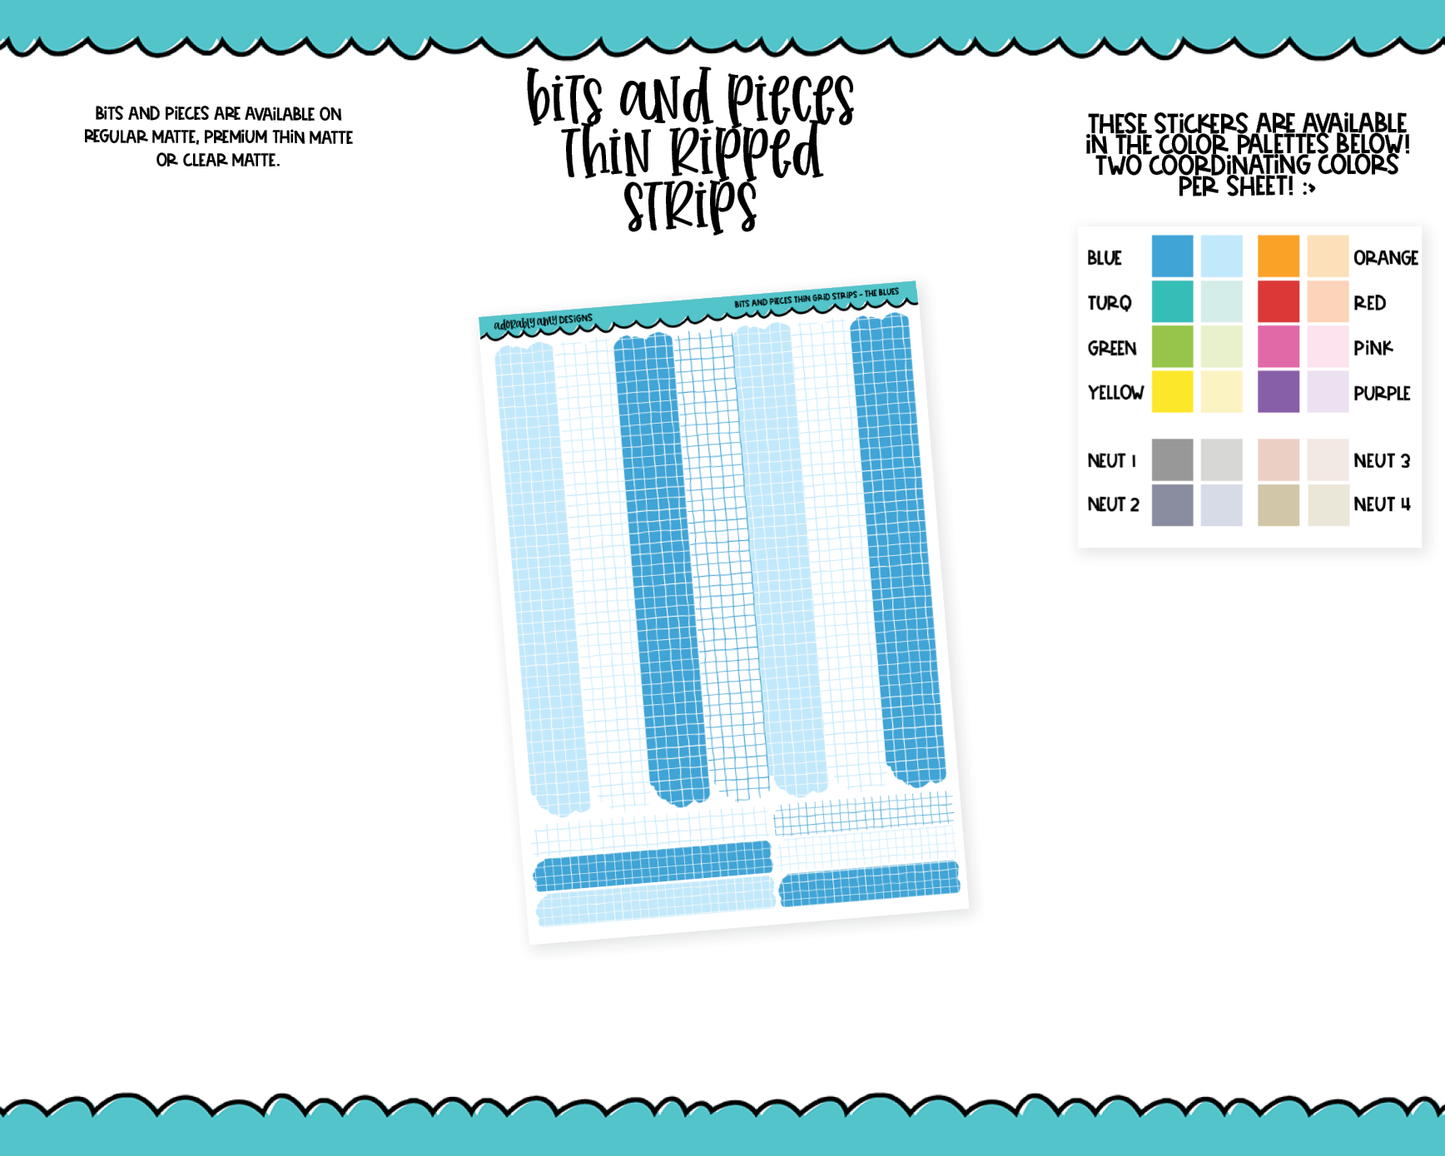 Bits & Pieces Thin Strips Pieces Kit Addons for Any Planner in 13 different Color Schemes